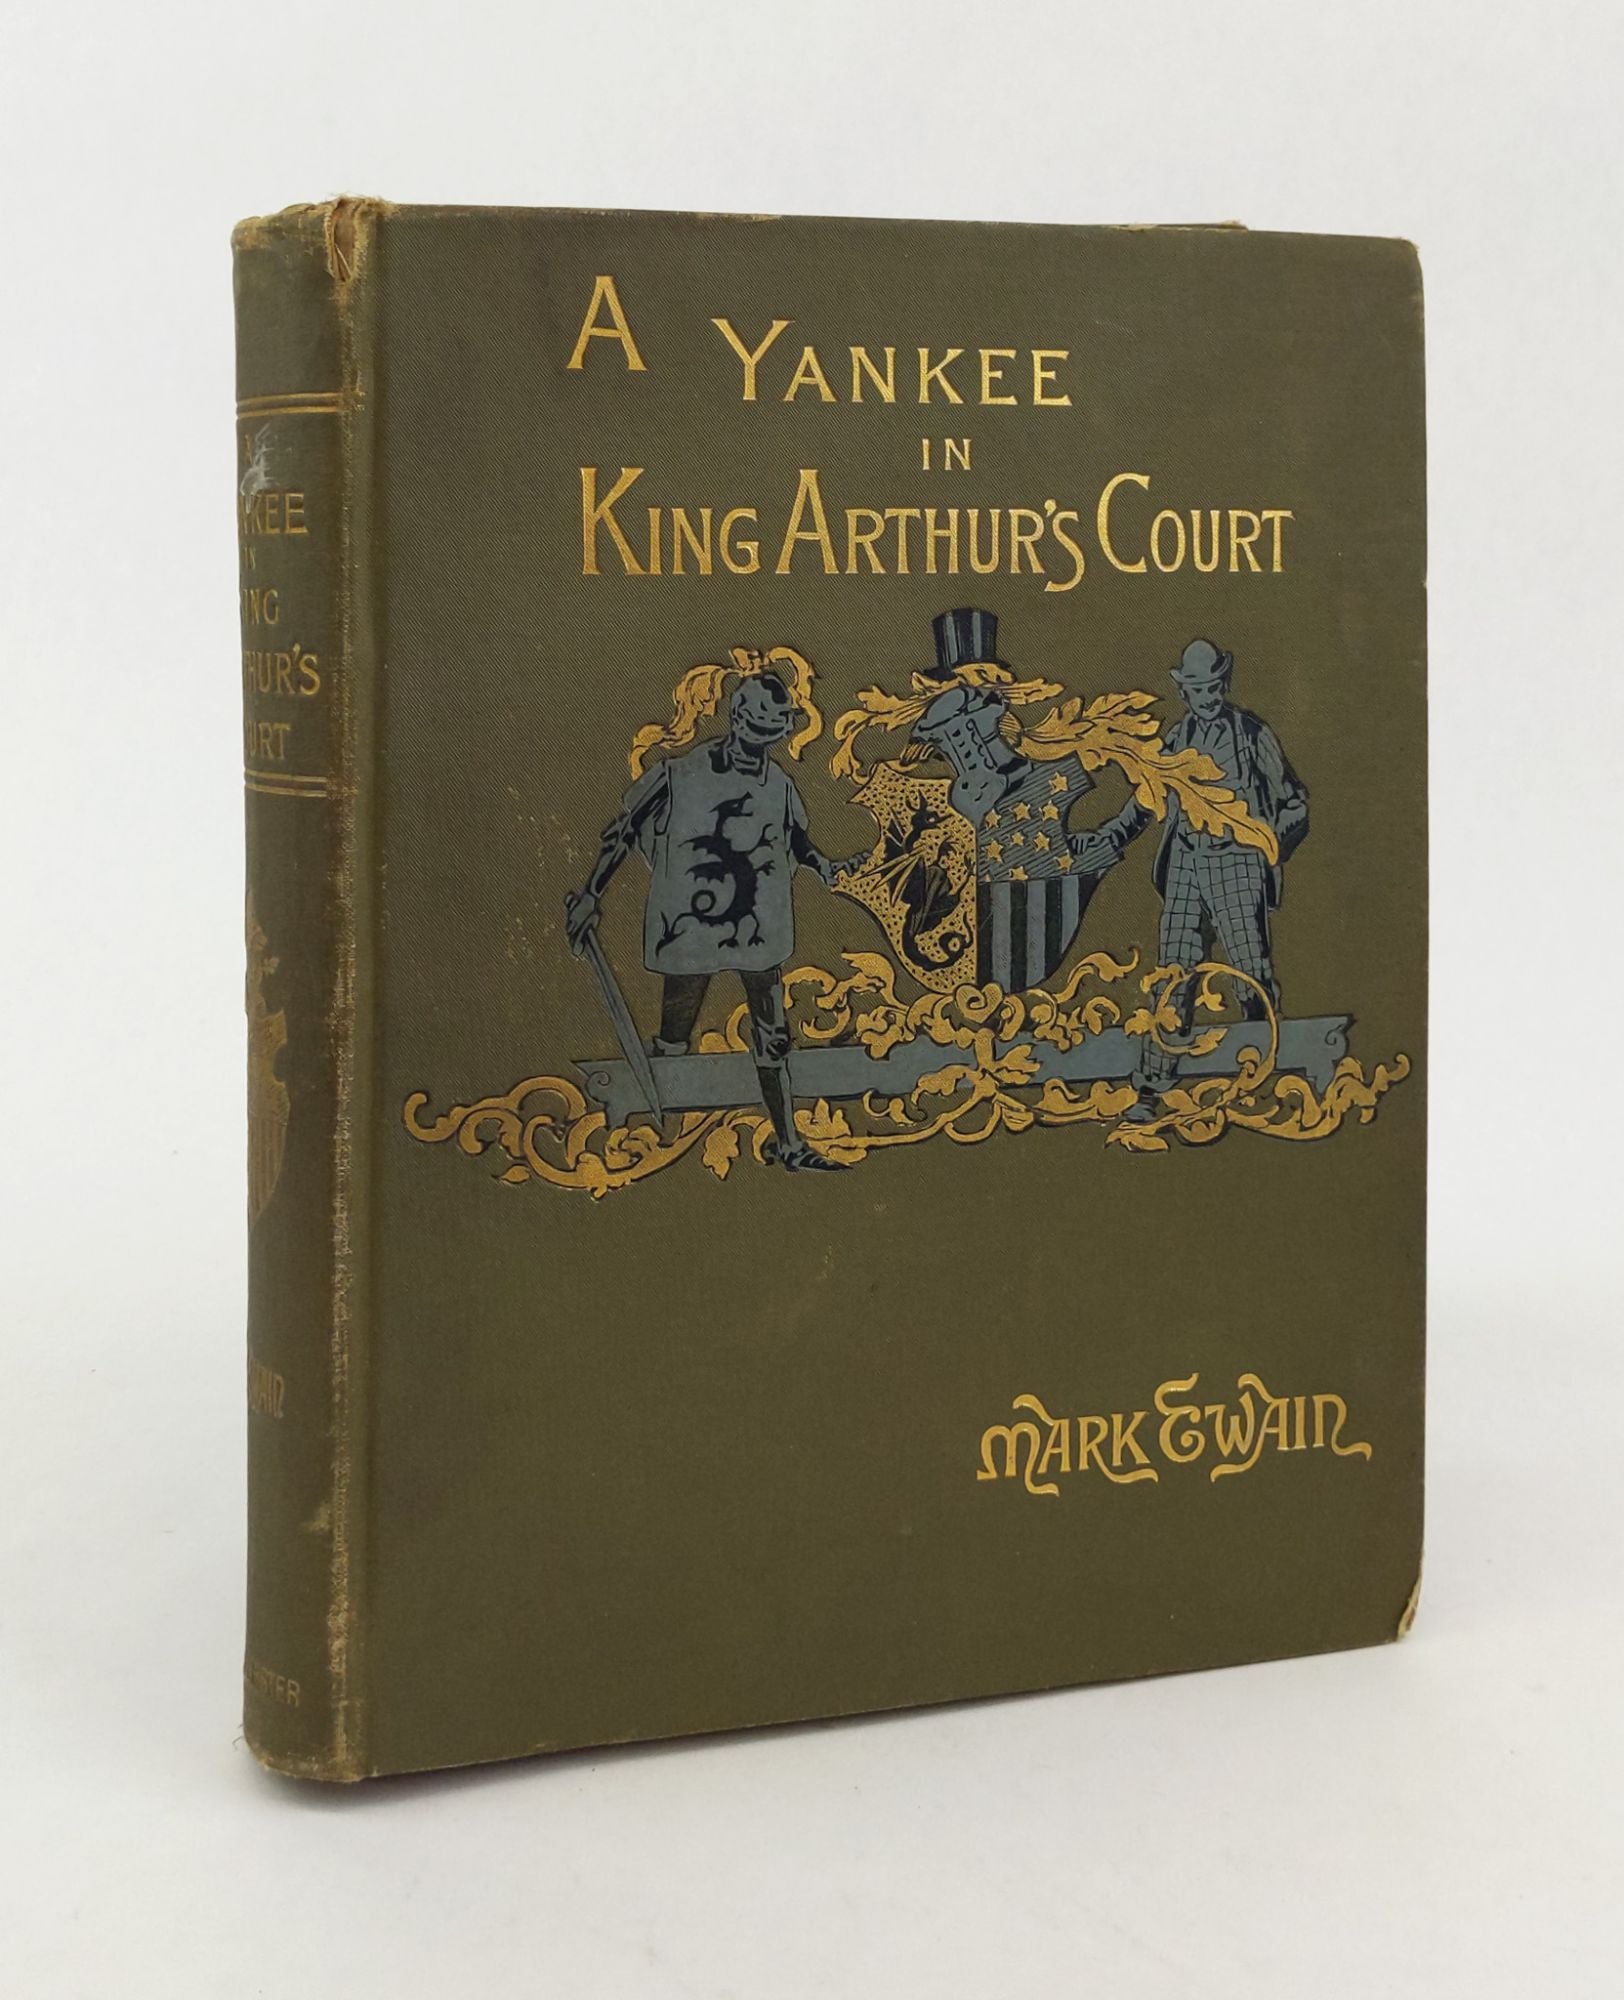 Product Image for A YANKEE IN KING ARTHUR'S COURT